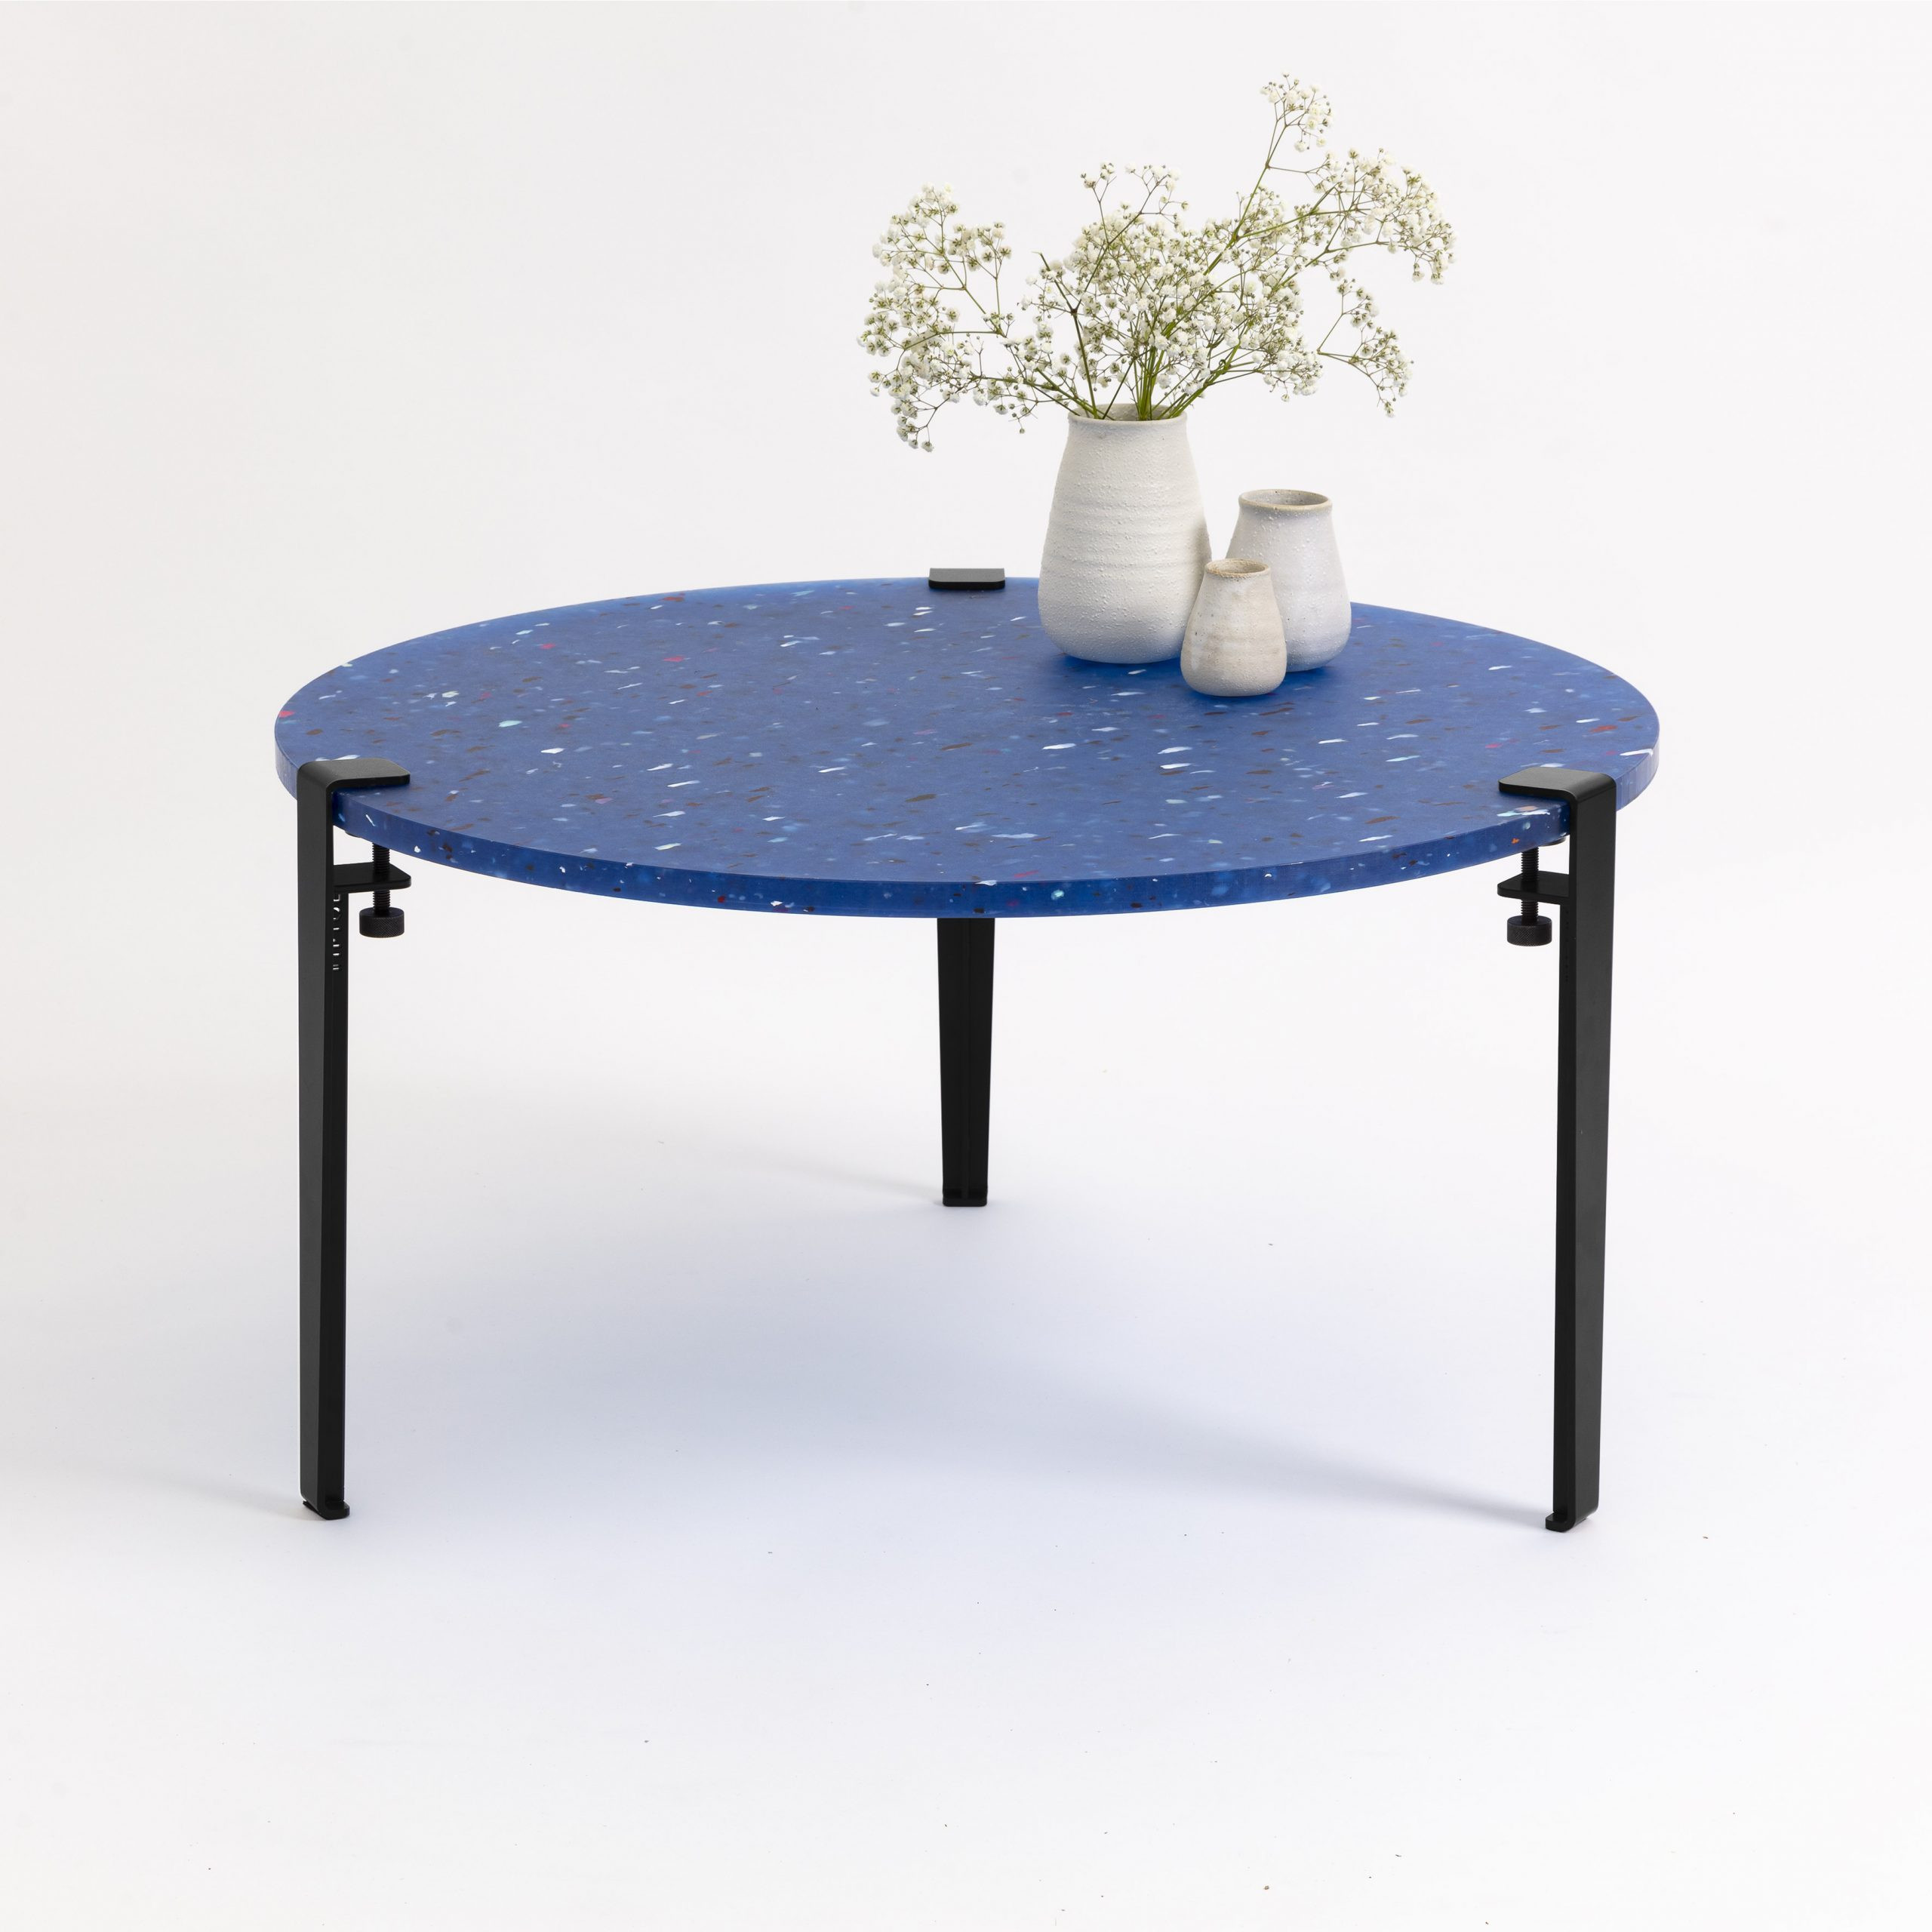 PACIFICO recycled plastic coffee table